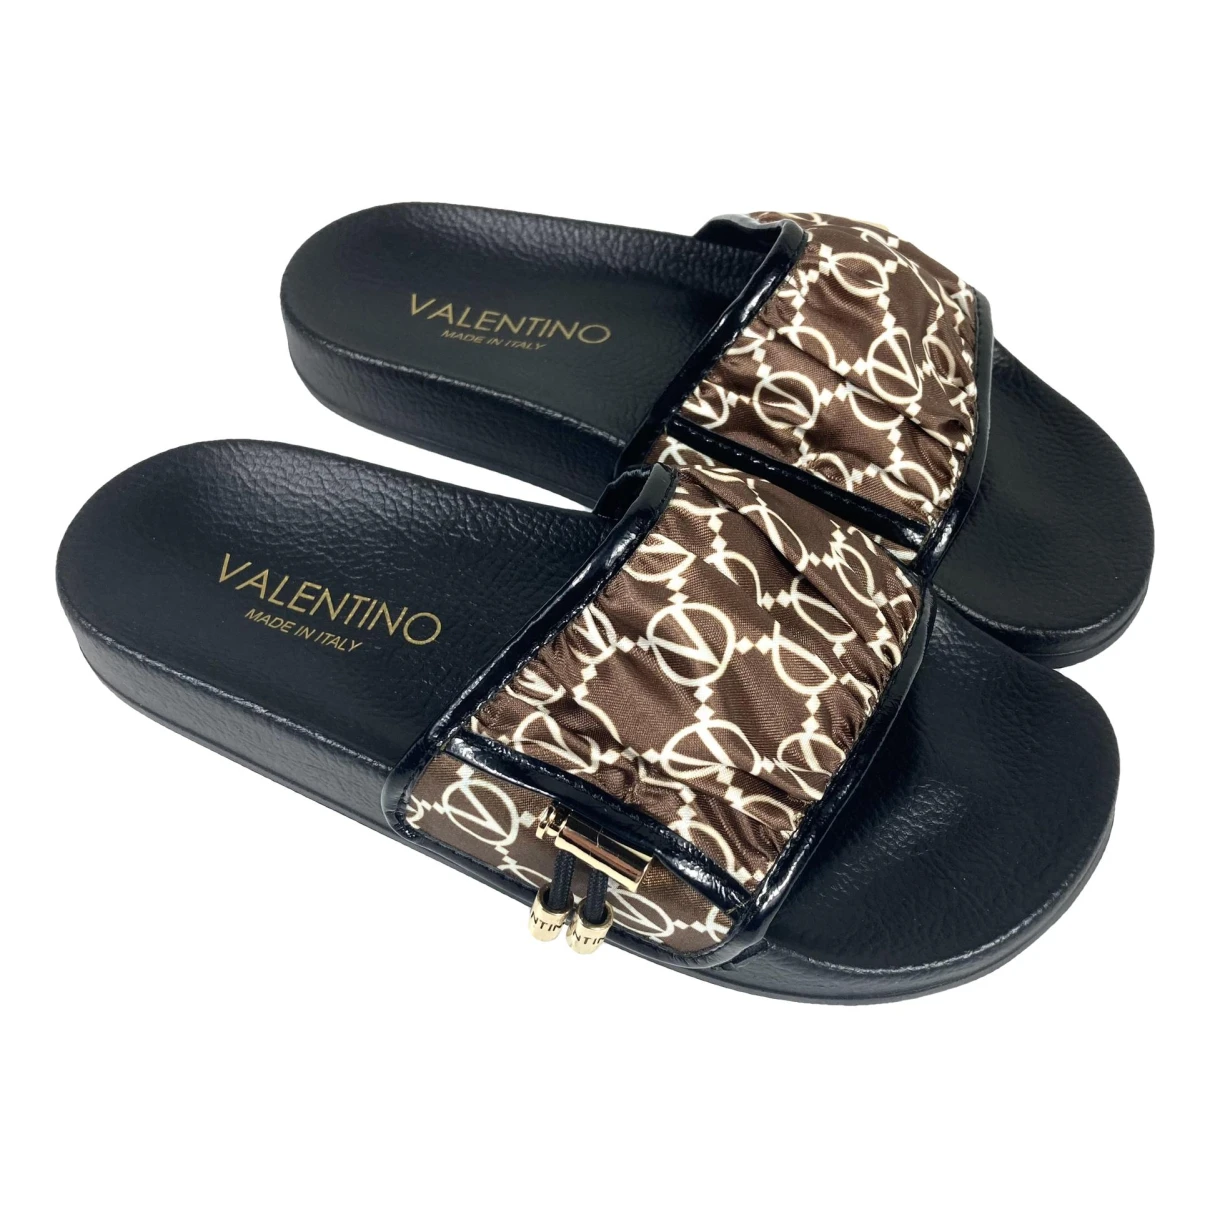 shoes Valentino by mario valentino sandals for Female Cloth 37 EU. Used condition